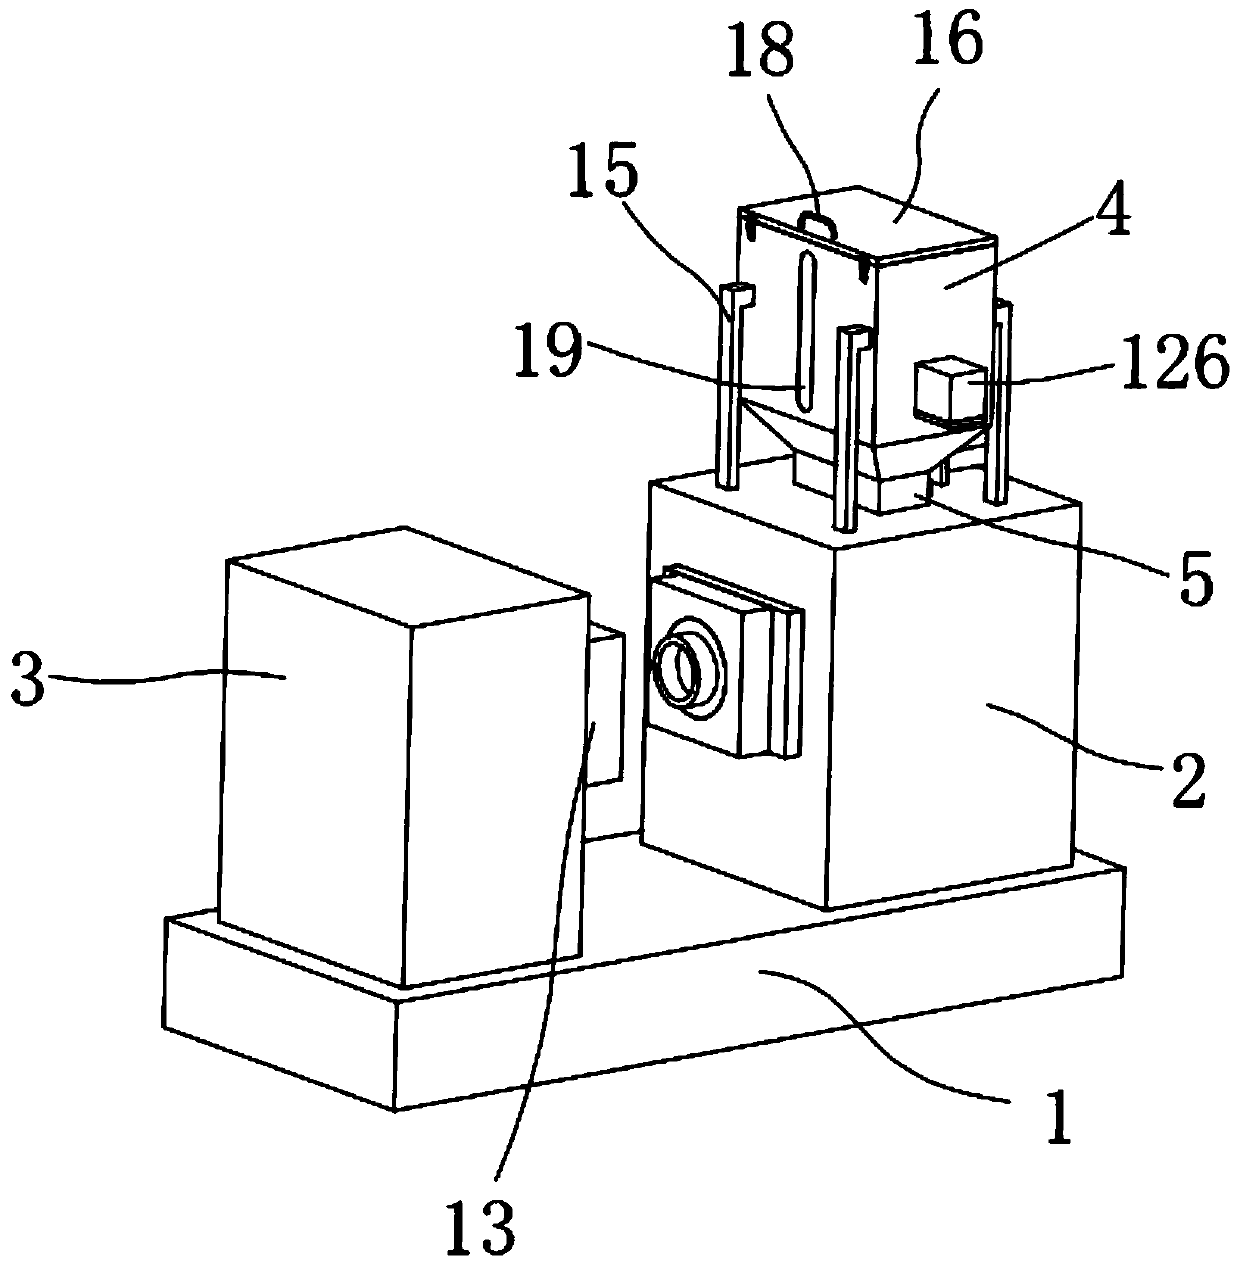 Bakelite injection molding device with functions of automatic feeding and products out of mold automatically